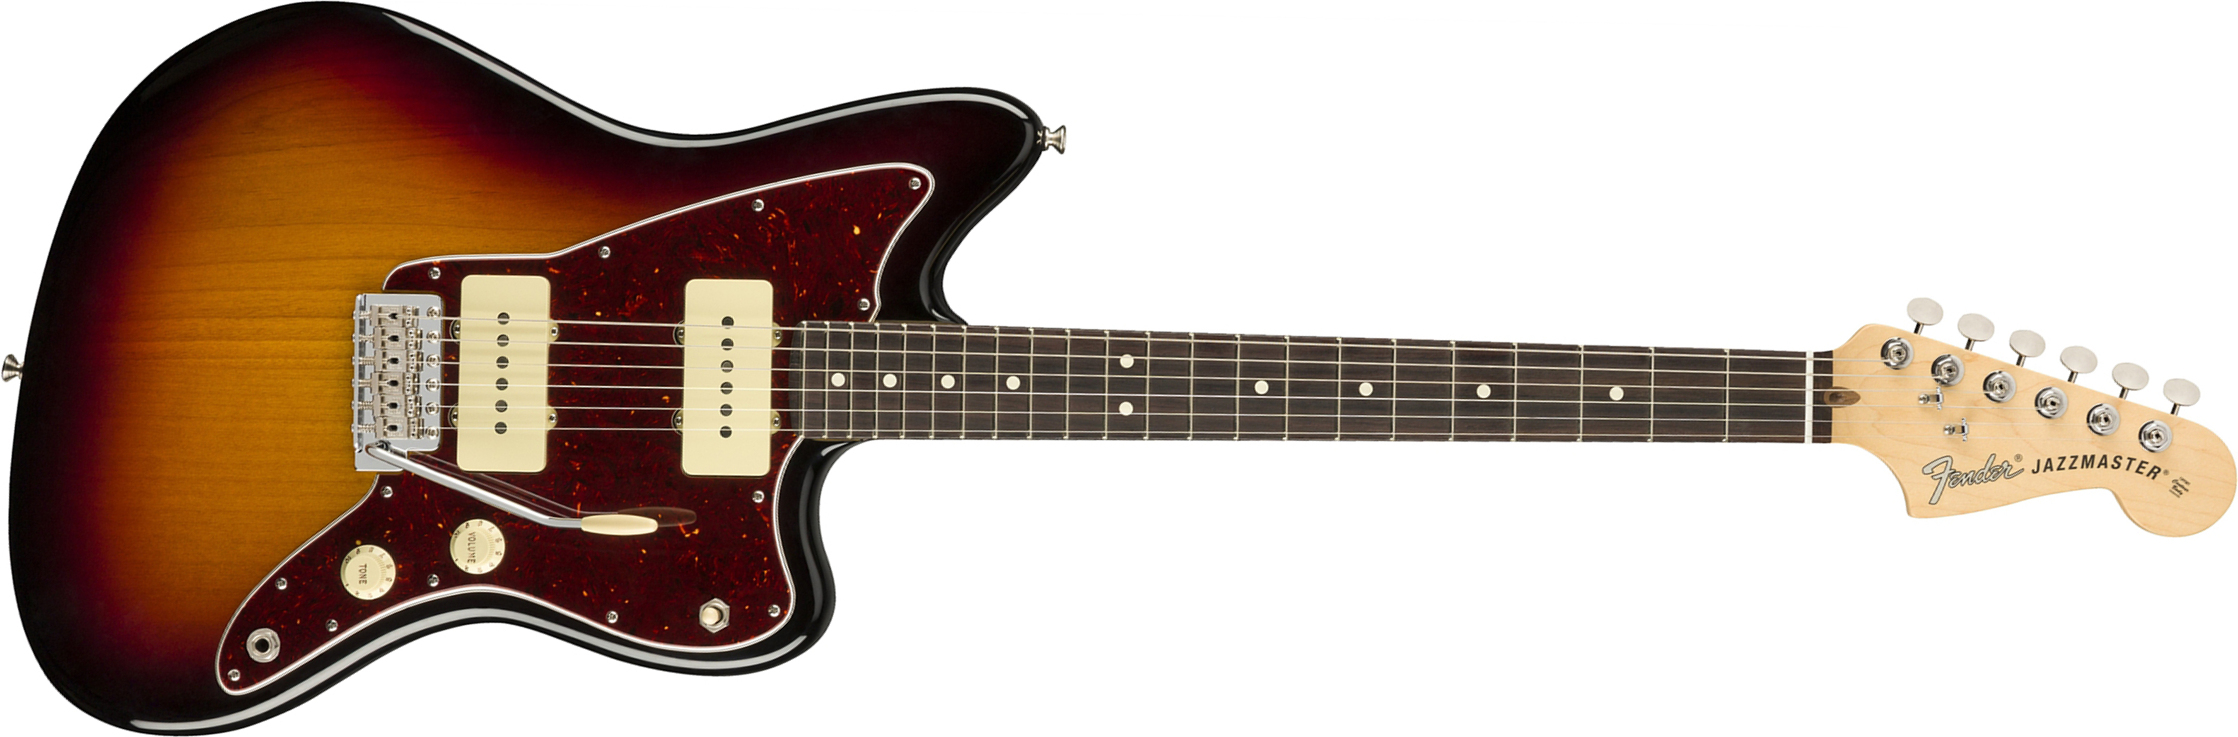 Fender Jazzmaster American Performer Usa Ss Rw - 3-color Sunburst - Double cut electric guitar - Main picture